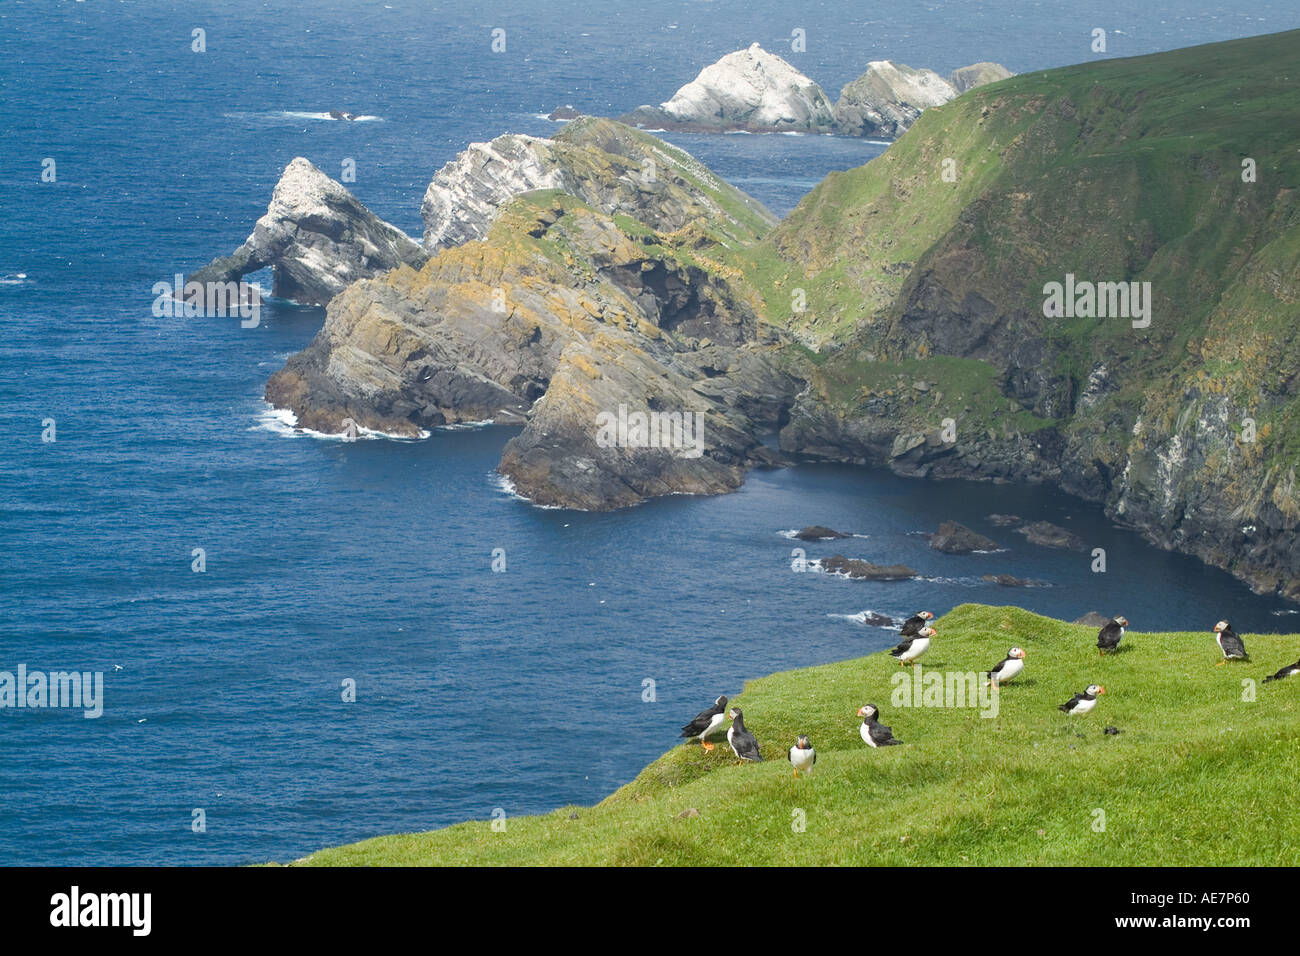 dh Herma Ness UNST SHETLAND Puffins on cliff top Flodda Urda Clingra Stack gannetries cliffs islands hermaness island uk puffin colony nature reserve Stock Photo